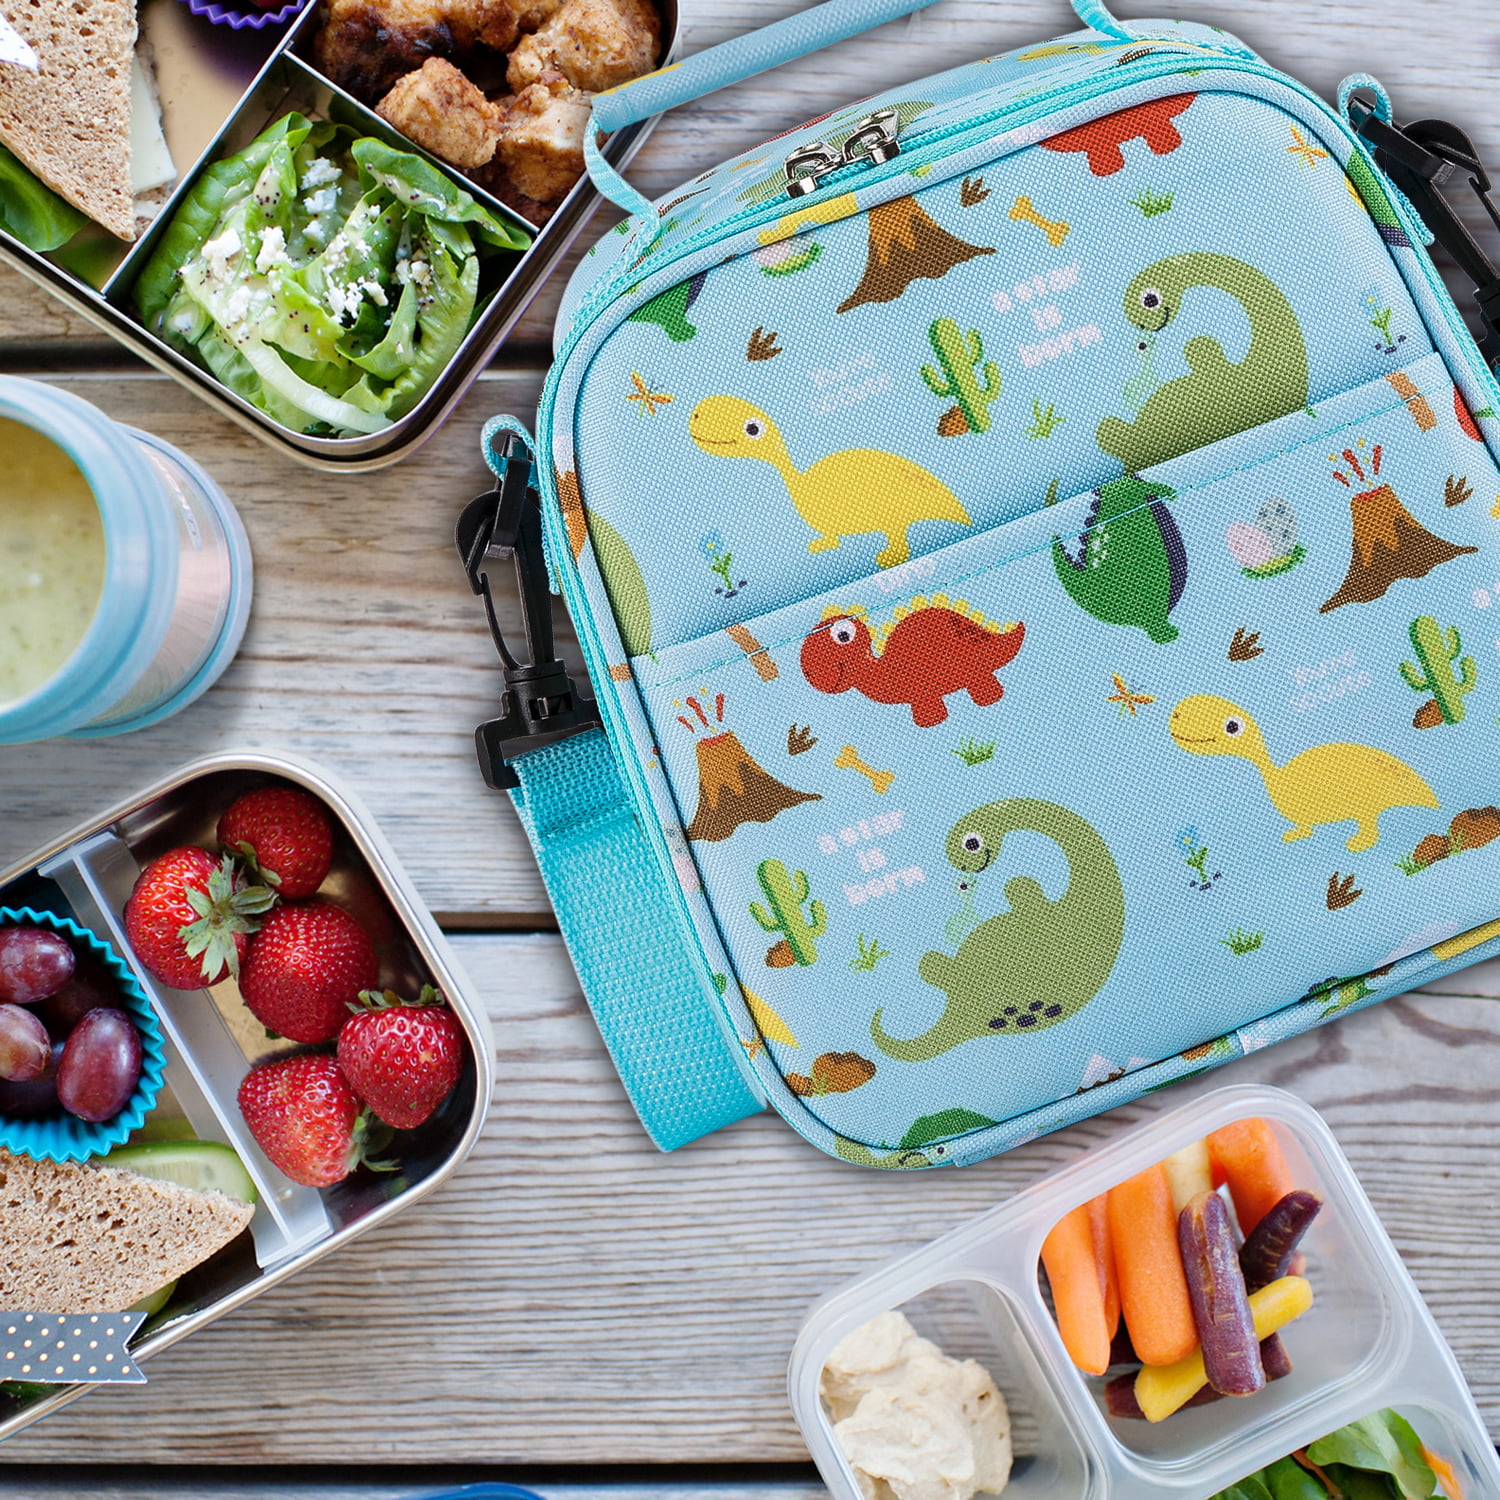 Kids Car Insulated Lunch/snack Bags/ Toddler Lunch Bag / Kids Lunch Box /  Kids School Bag/ Insulated Lunch Bag 